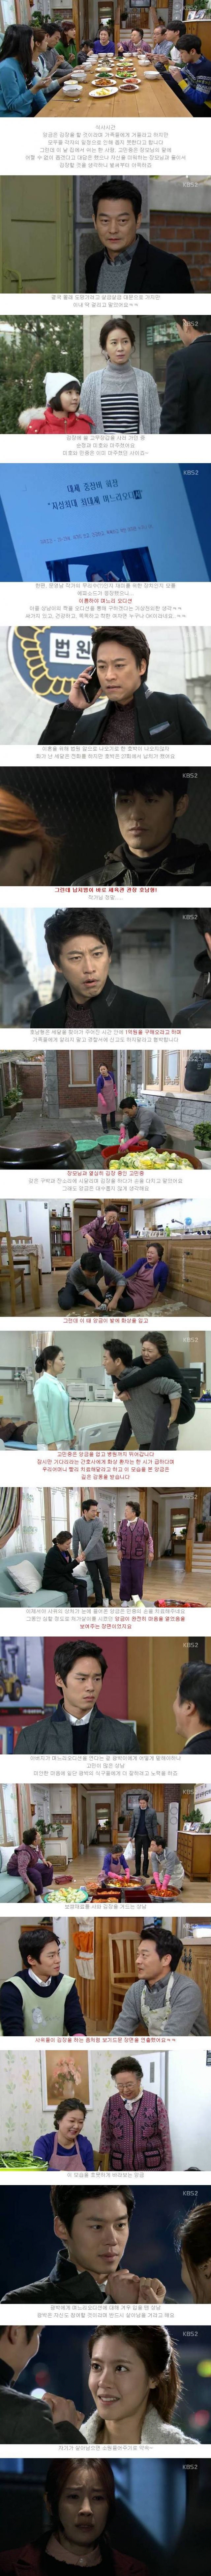 episodes 27 and 28 captures for the Korean drama 'The Wang Family'